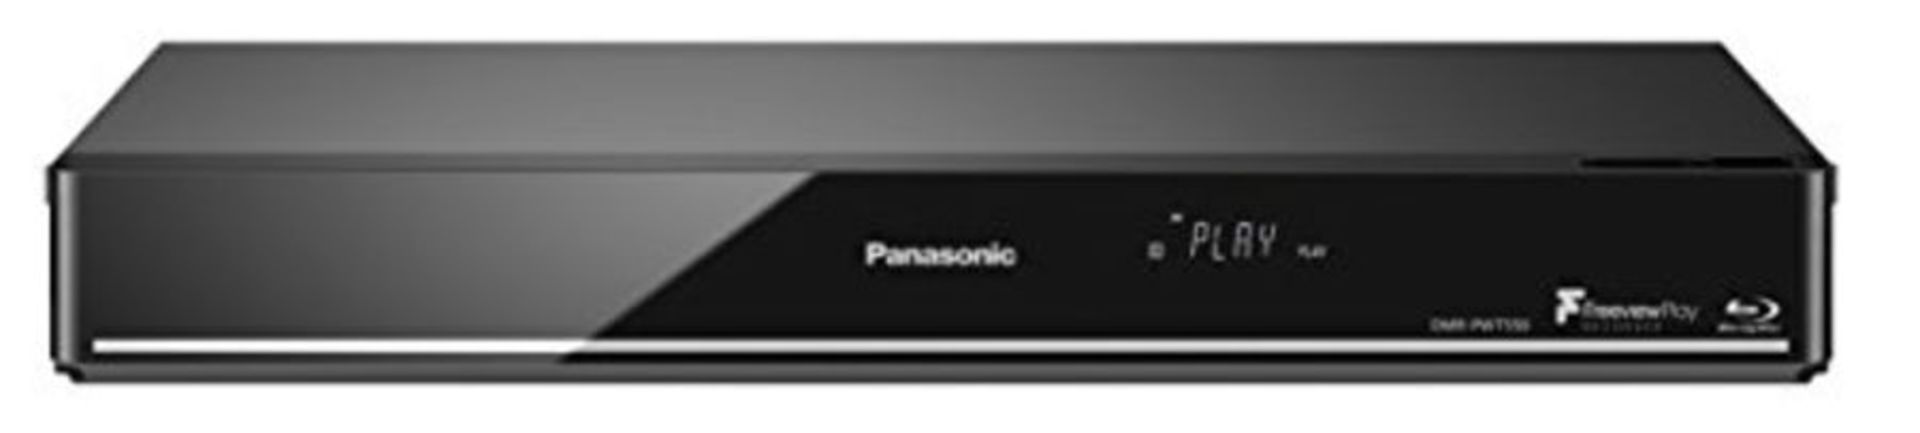 RRP £298.00 Panasonic DMR-PWT550EB Blu-Ray Player and HDD Recorder with Freeview Play, Black